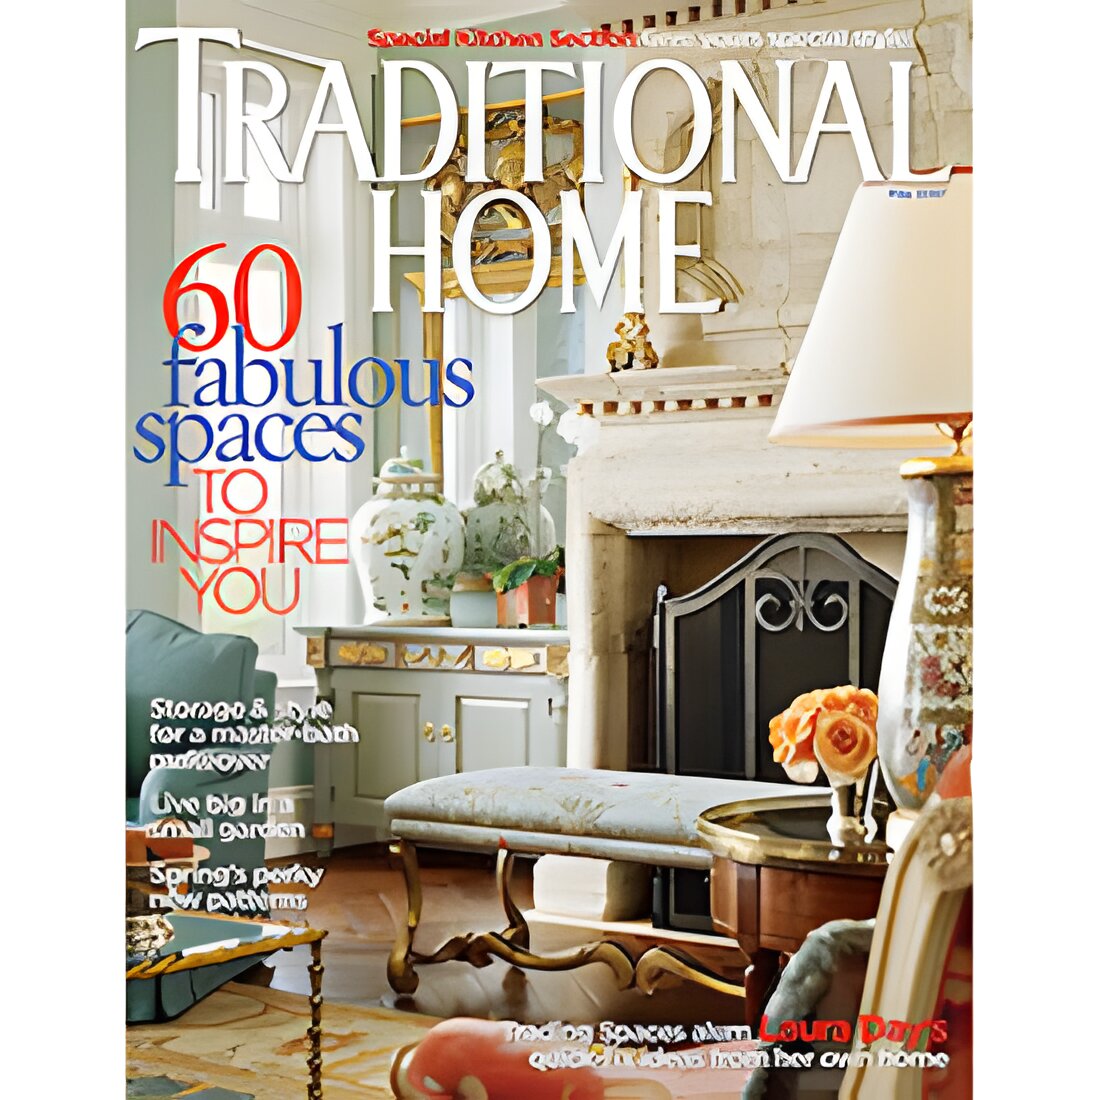 Free 2-year Subscription To Traditional Home Magazine